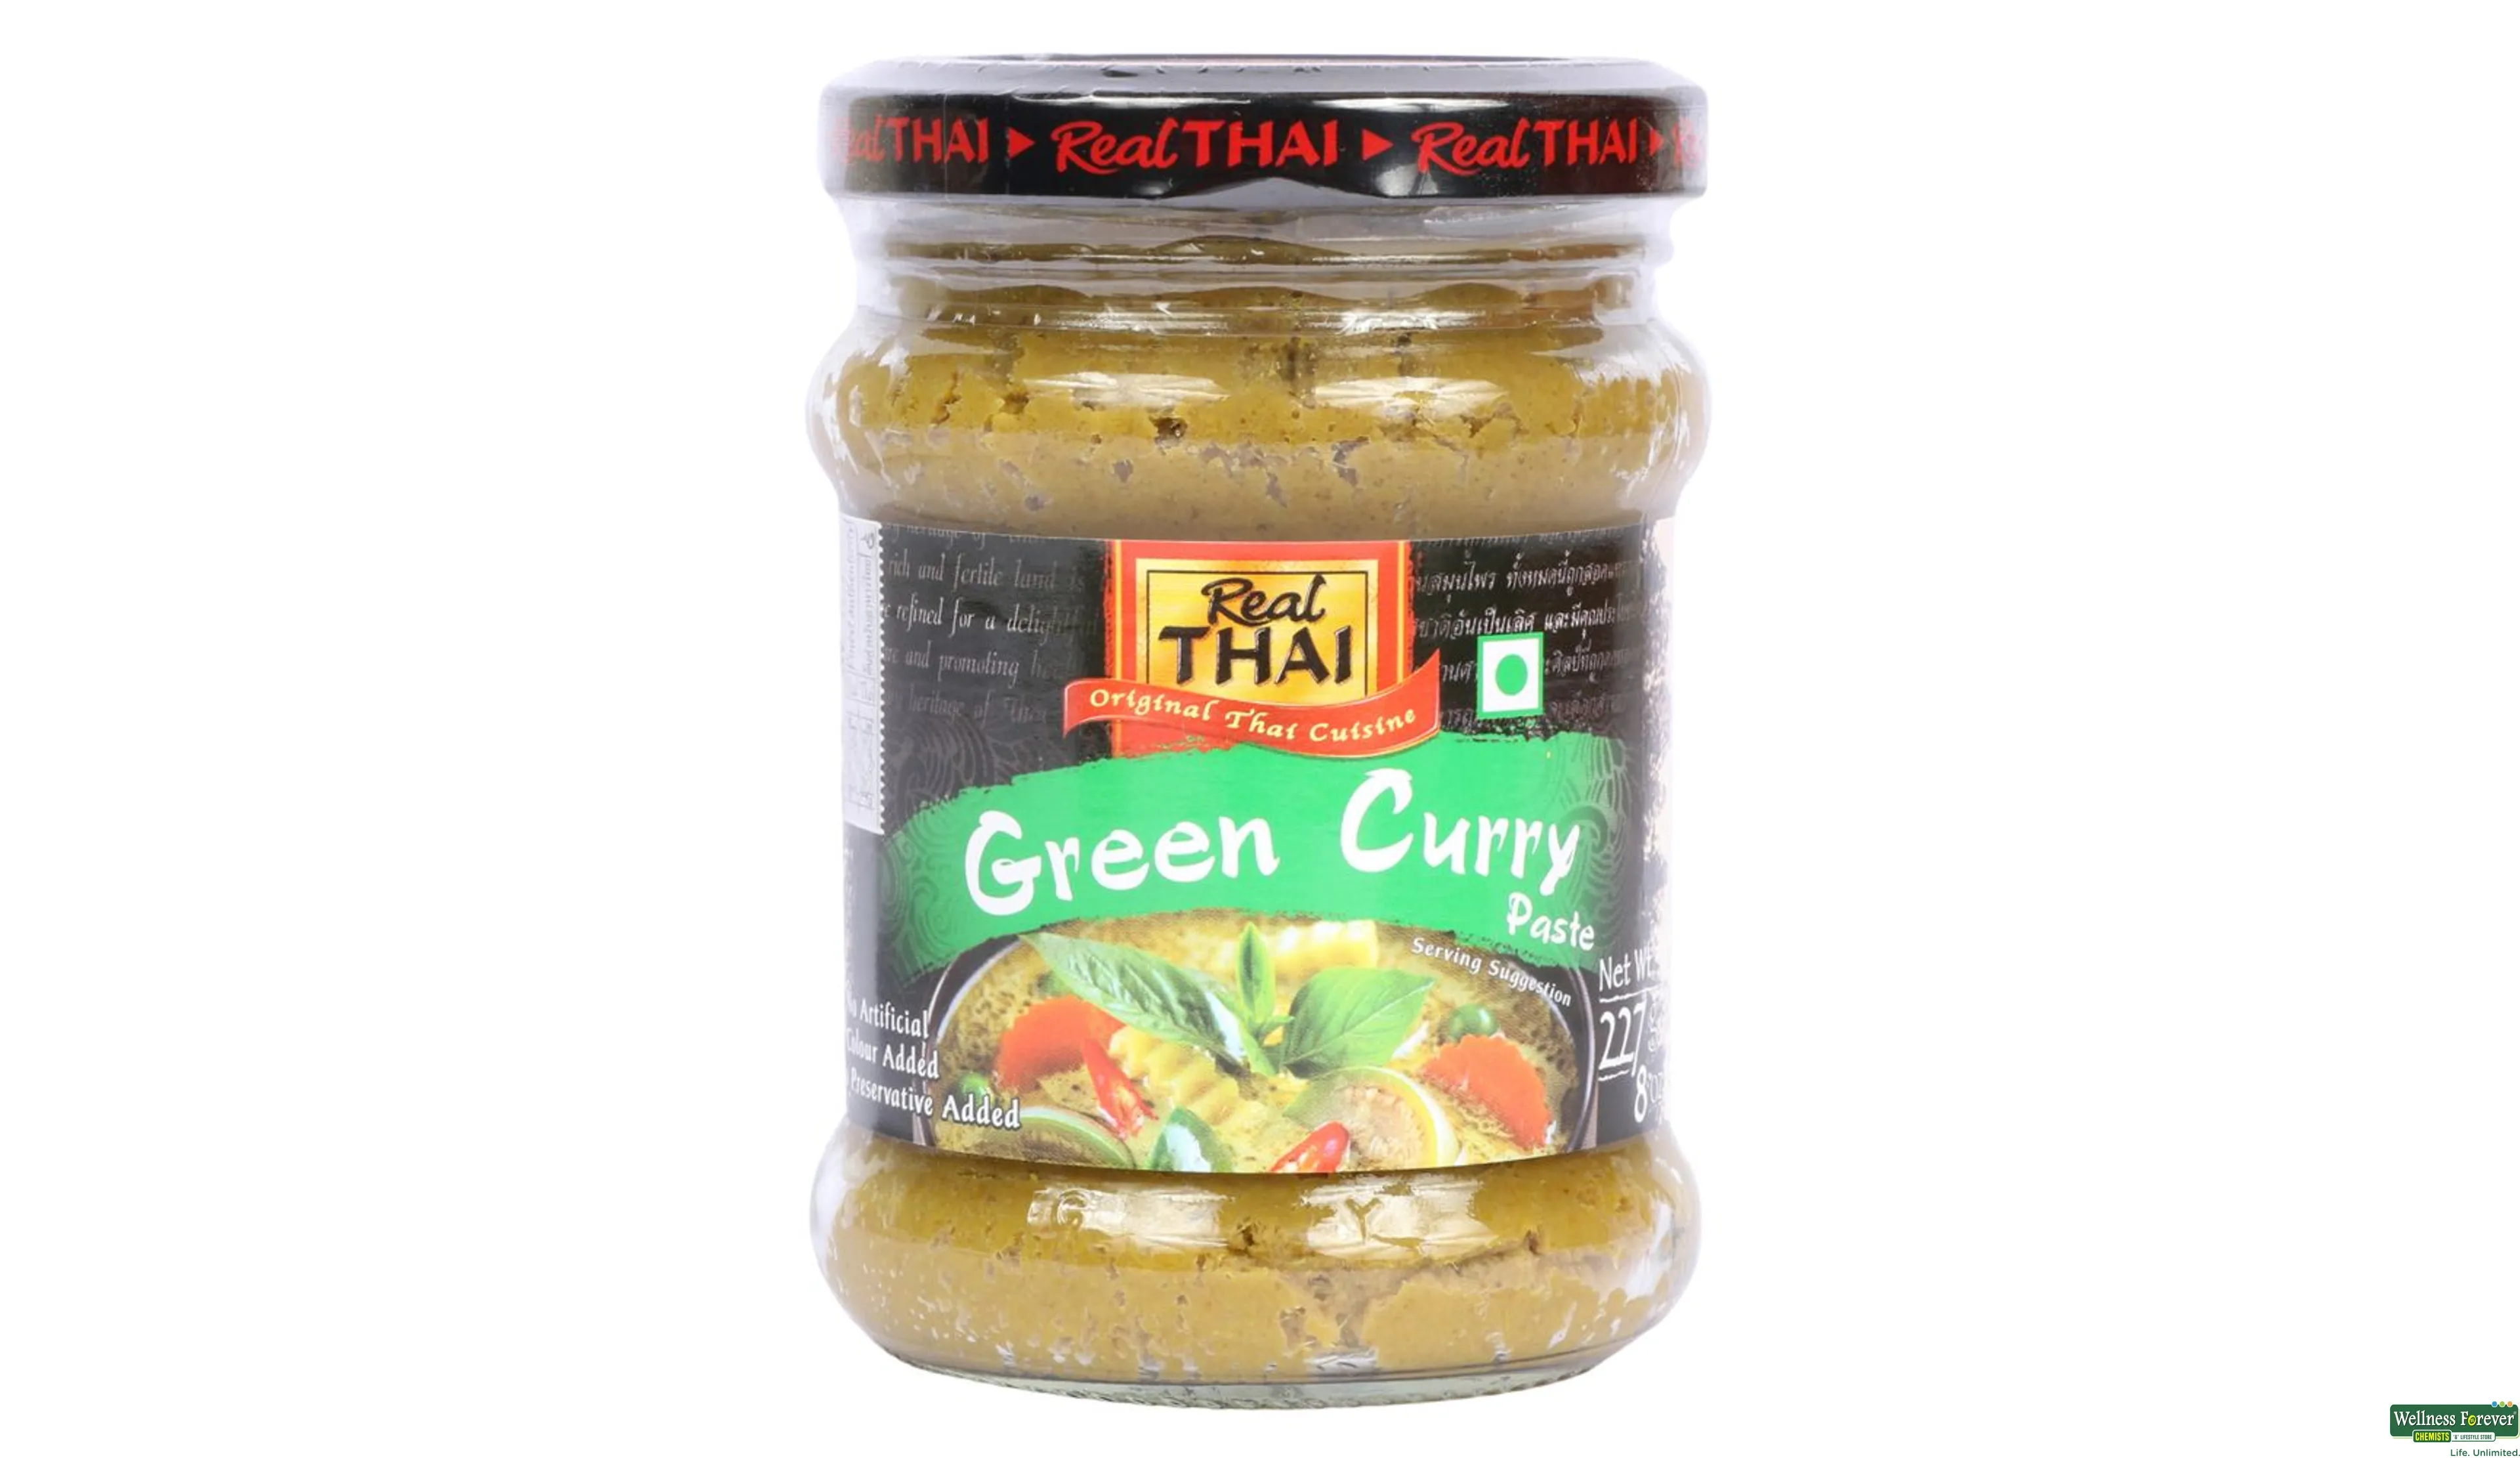 REAL THAI PASTE GREEN CURRY 227GM- 2, 227GM, 